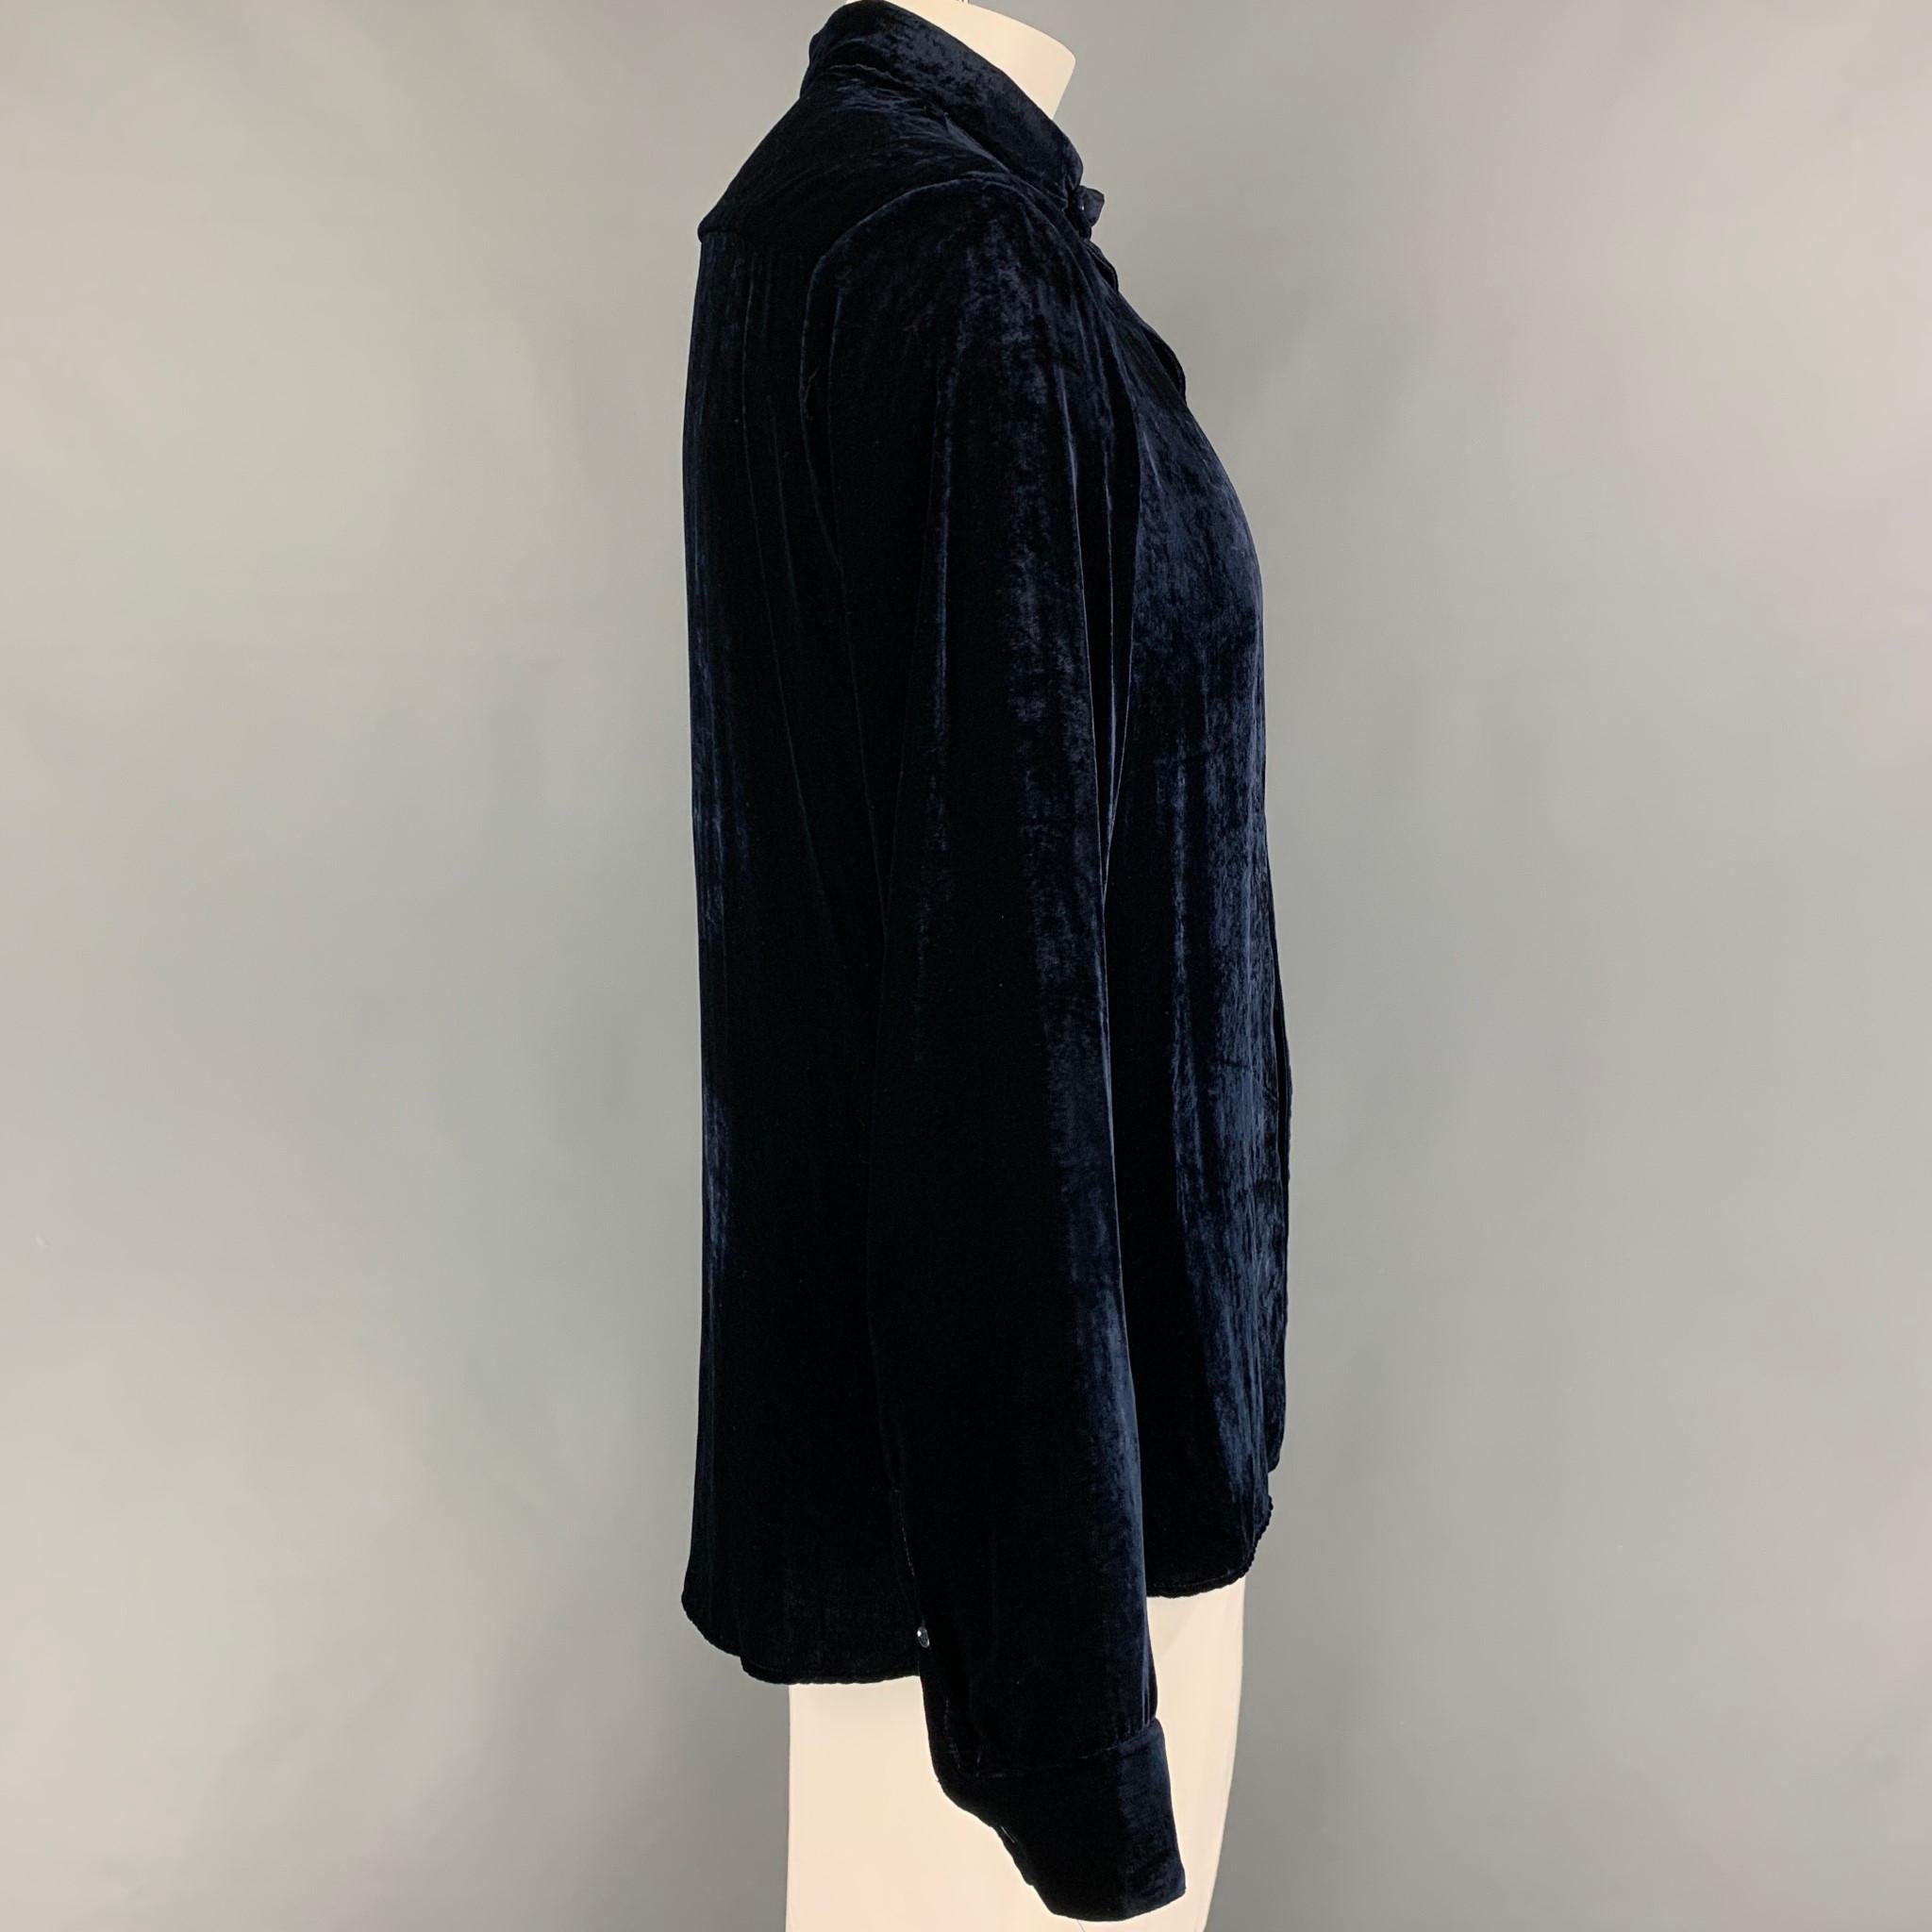 GIORGIO ARMANI long sleeve shirt comes in a midnight blue velvet featuring a nehru collar and a buttoned closure. Made in Italy. 

Very Good Pre-Owned Condition.
Marked: 45/18

Measurements:

Shoulder: 19 in.
Chest: 46 in.
Sleeve: 27.5 in.
Length: